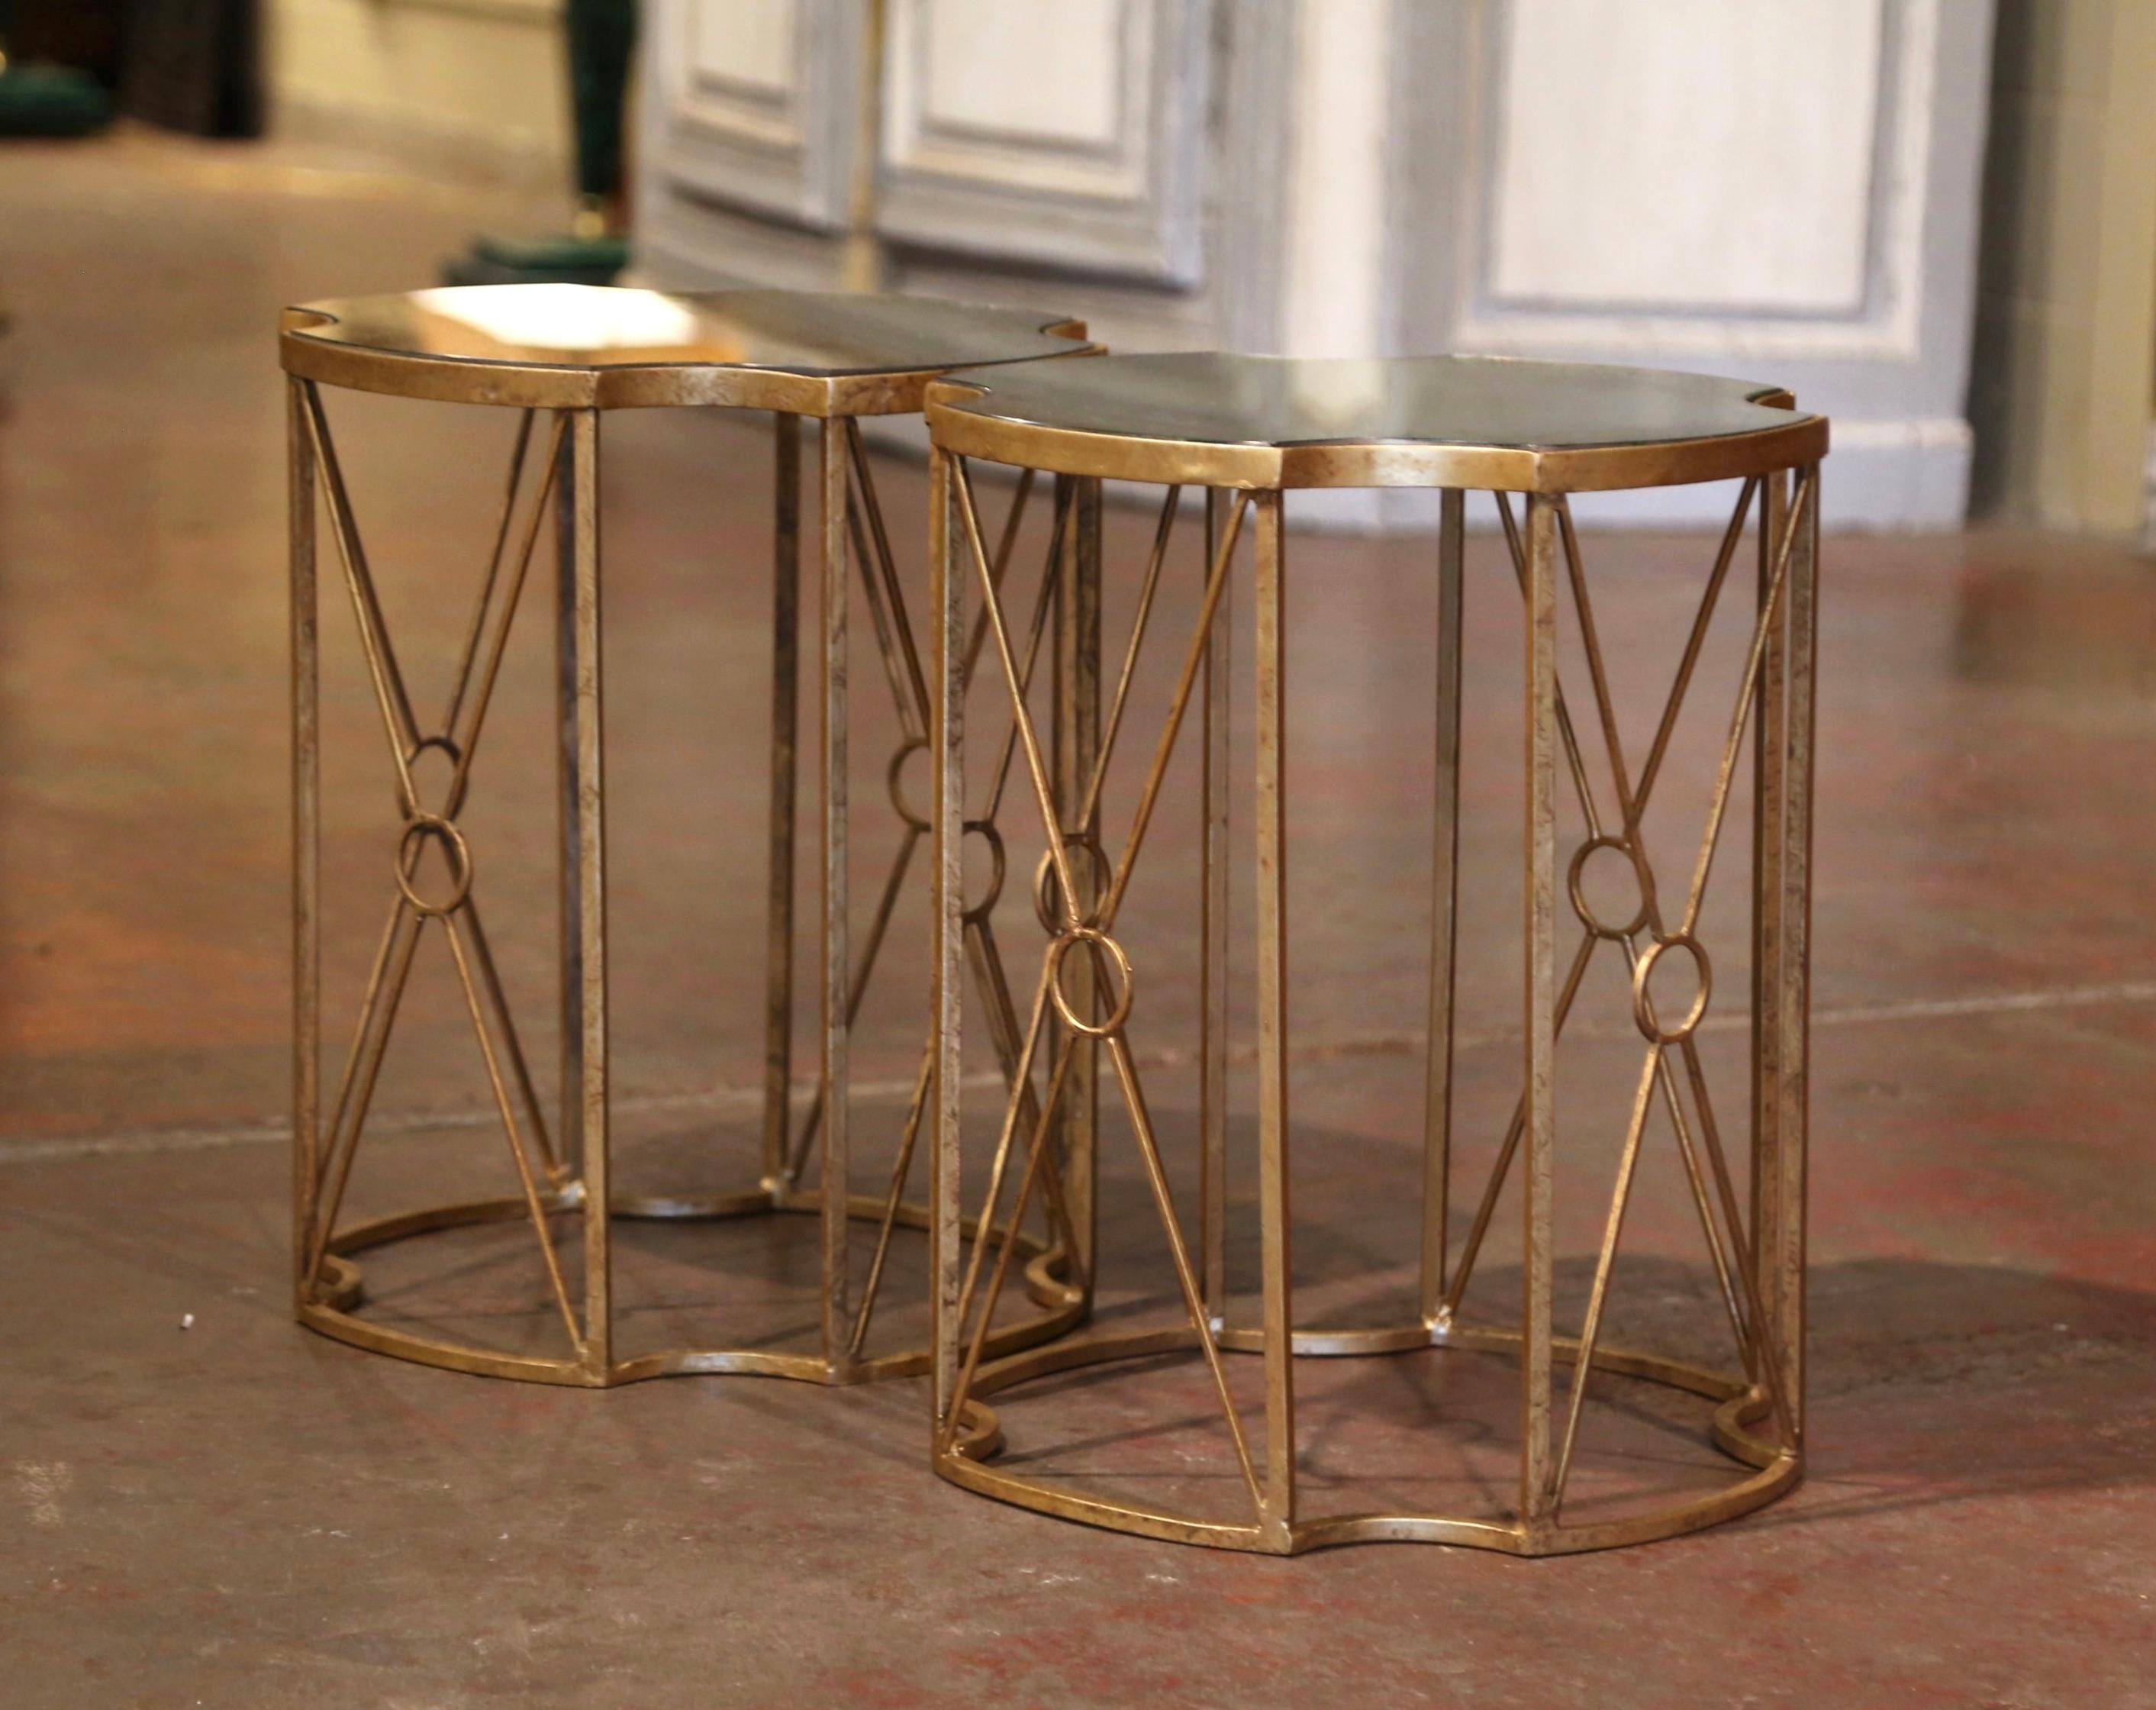 Decorate a living room or a den with this elegant pair of occasional tables. Each table has straight legs with X decor in between, and attached at the base with a decorative frame stretcher. The top is dressed with an inset smoked mirrored glass.